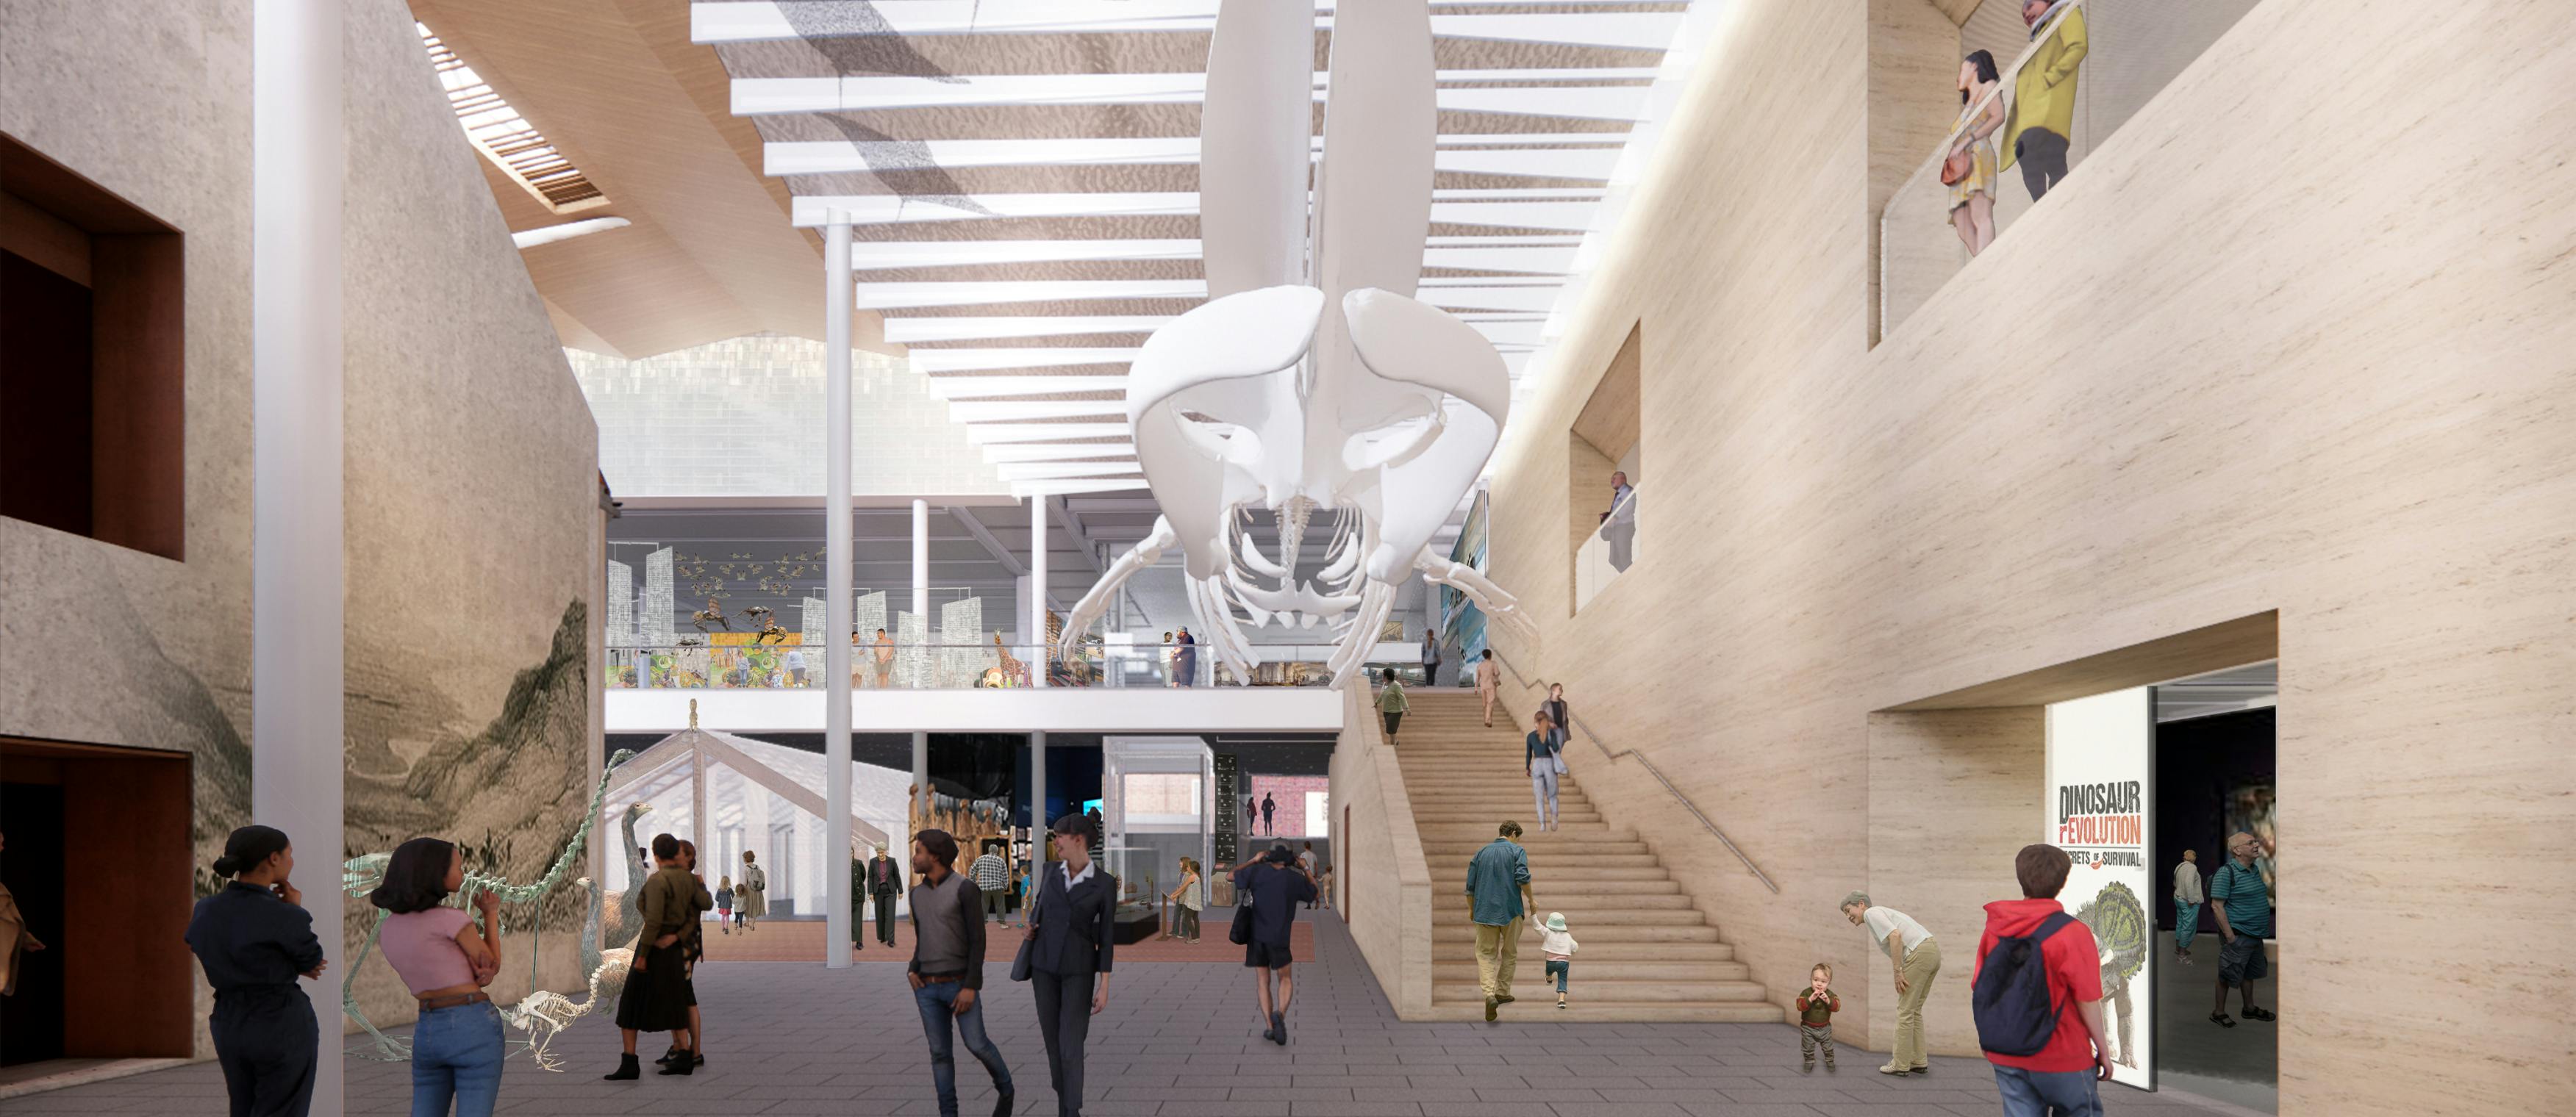 20 02 Canterbury Museum Preliminary Design Render Whale Atrium From Entry CR Credit Athfield Architects